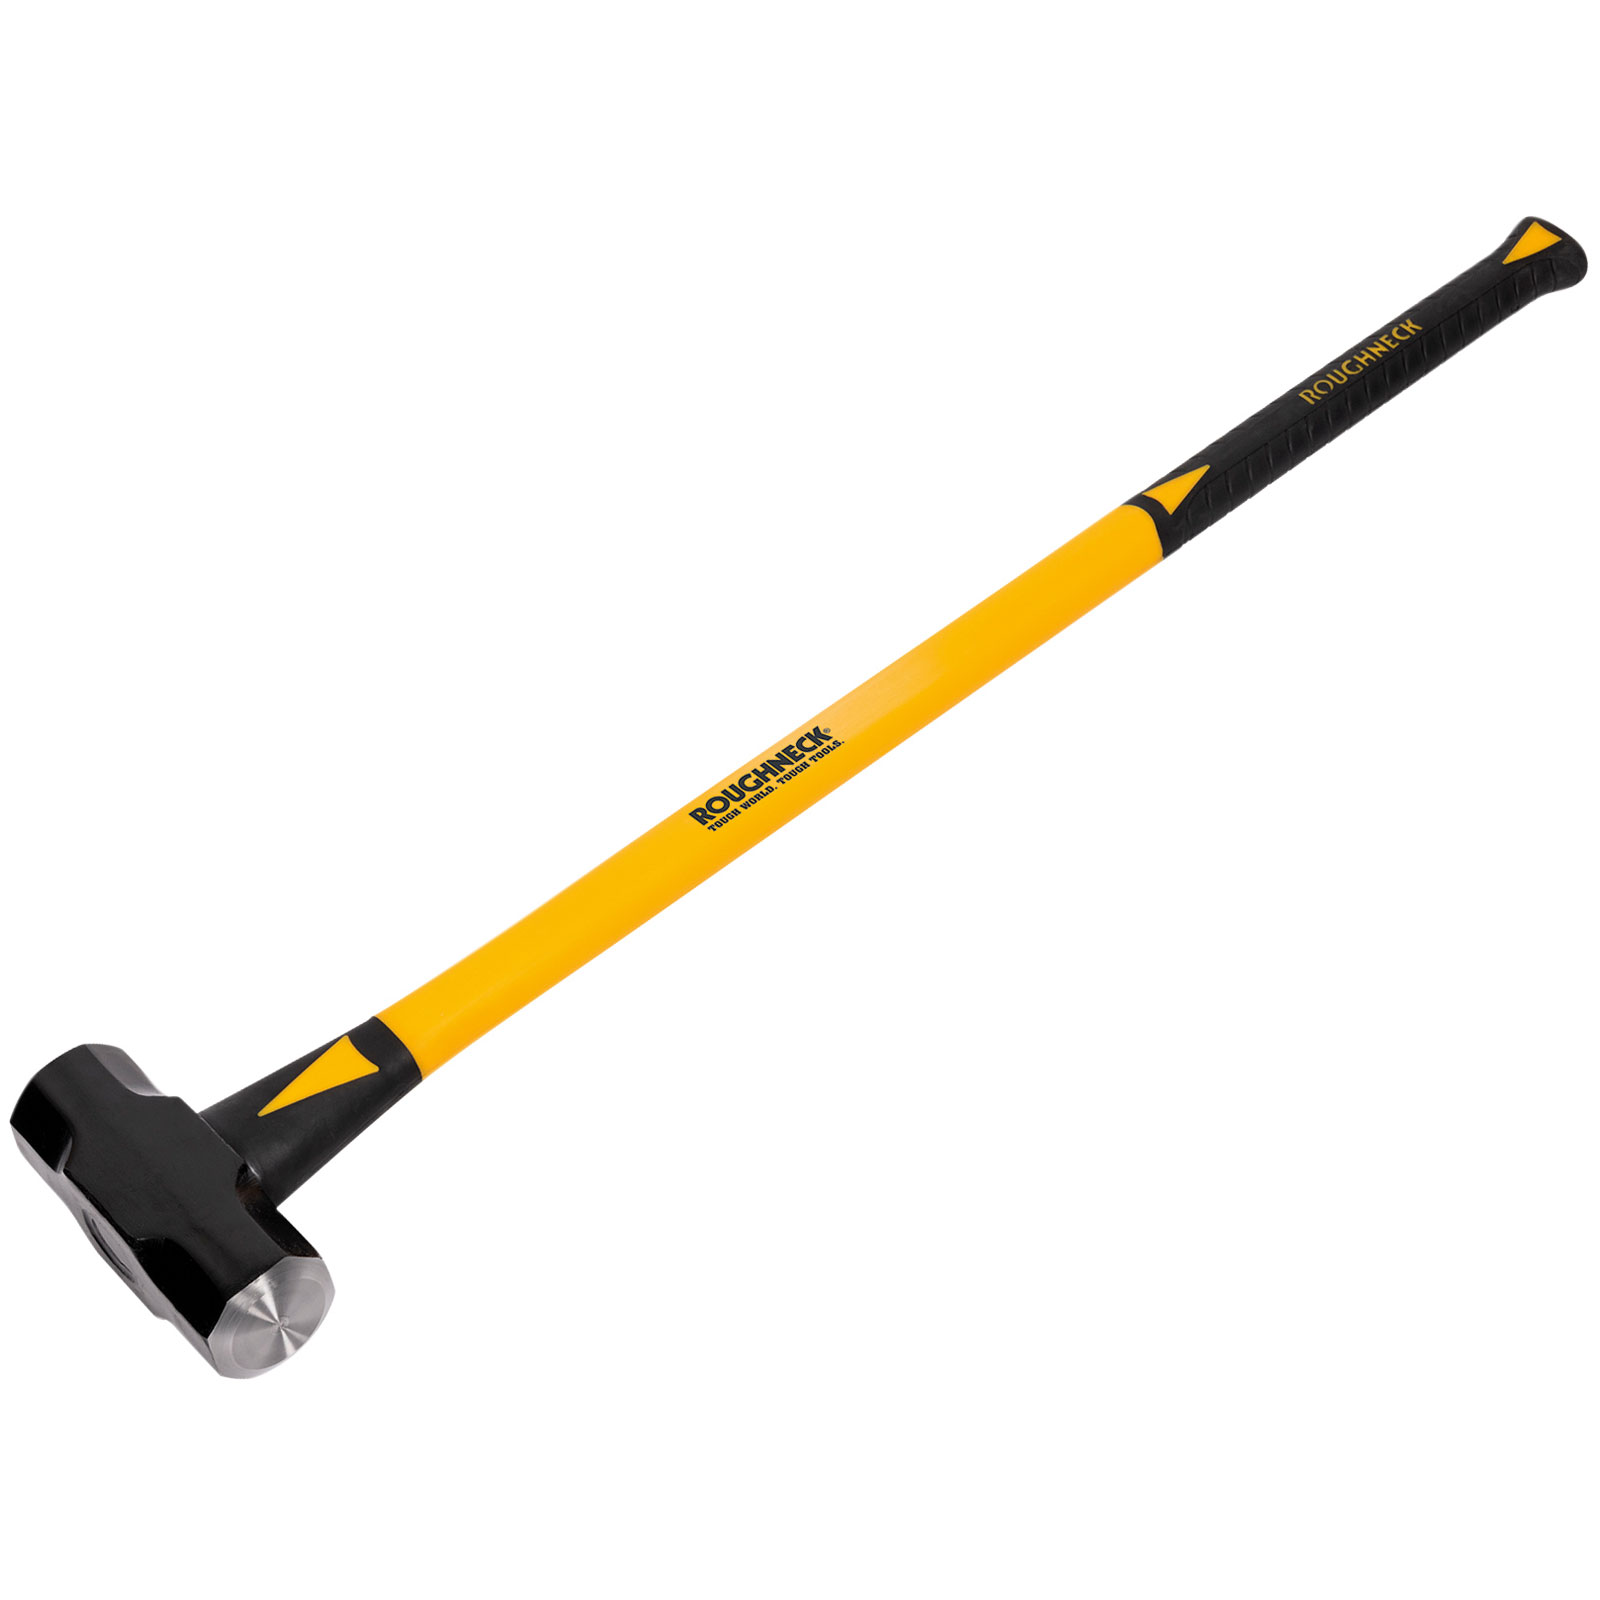 GroundWork 8 lb. 34 in. Fiberglass Handle Pro GWP Sledge Hammer at Tractor  Supply Co.